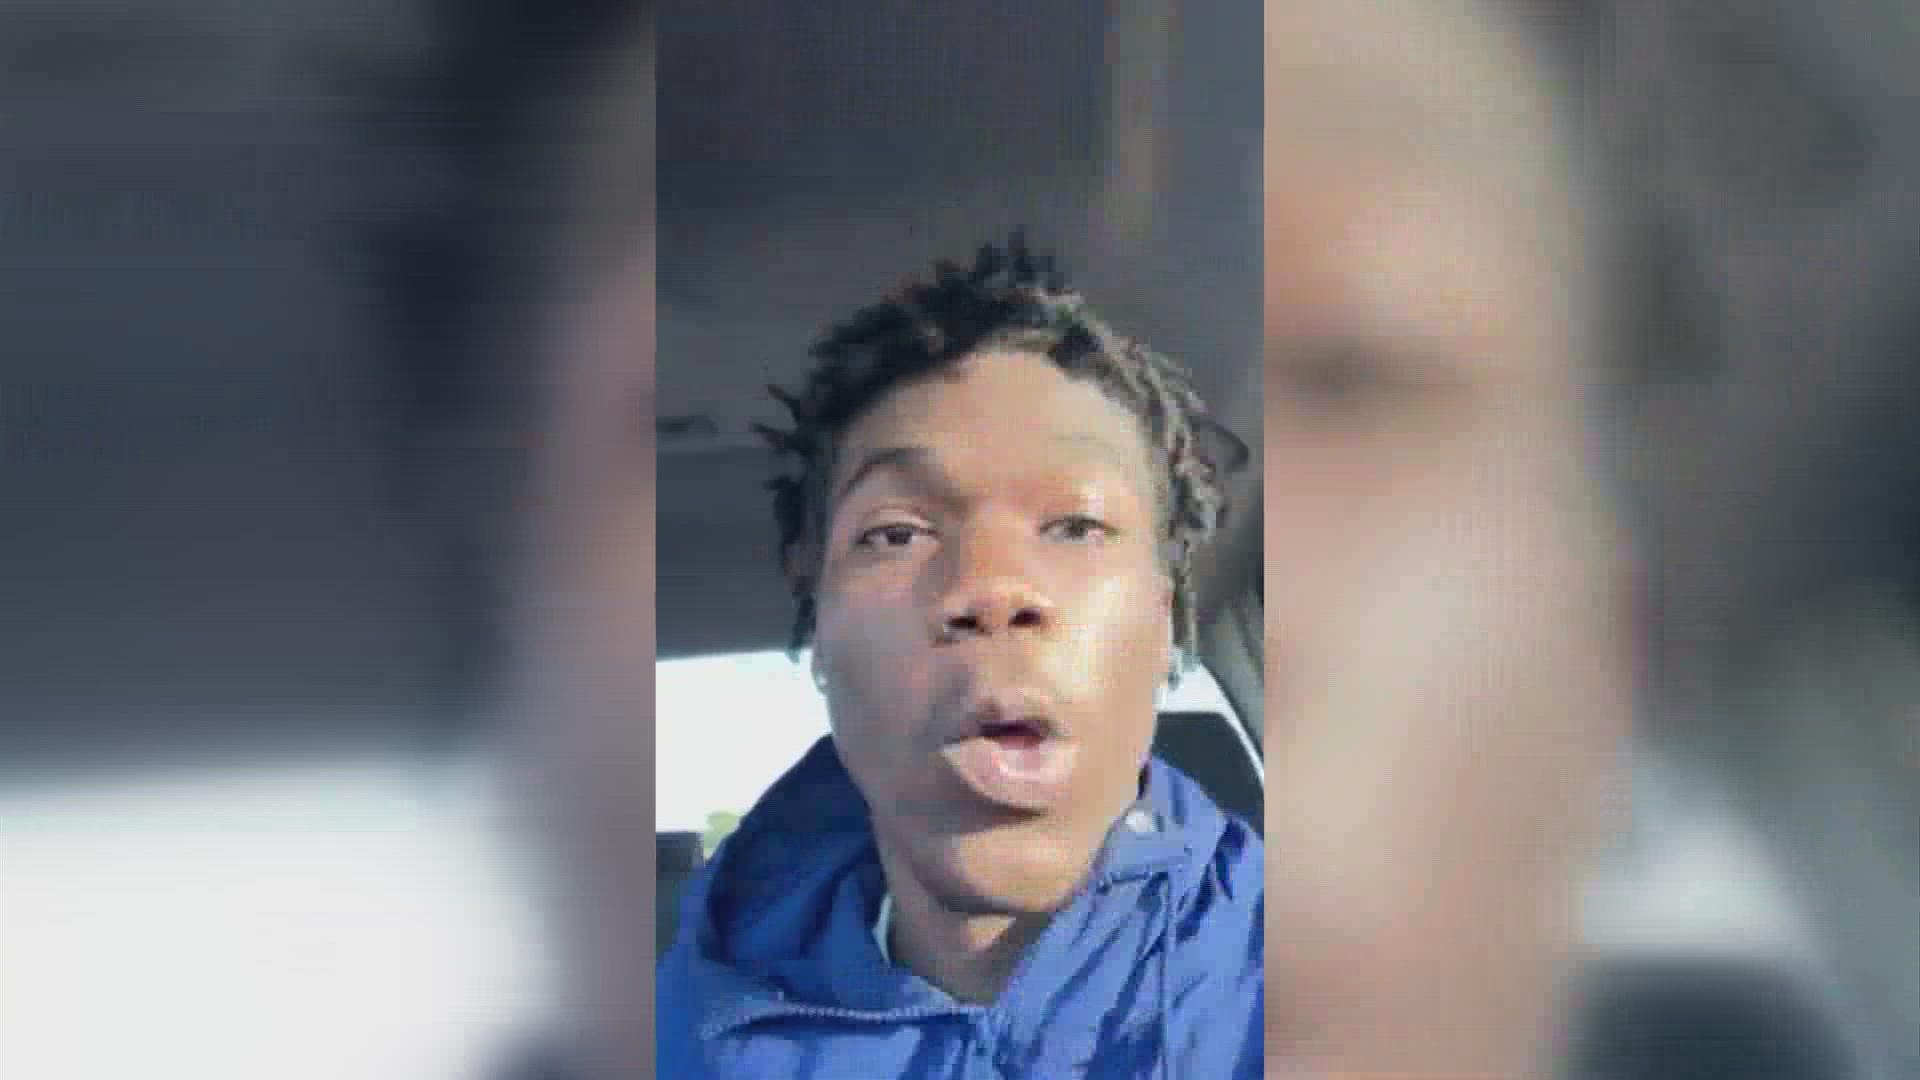 Tyrez Turner is one of the many teens who have been involved in violently stealing cars.